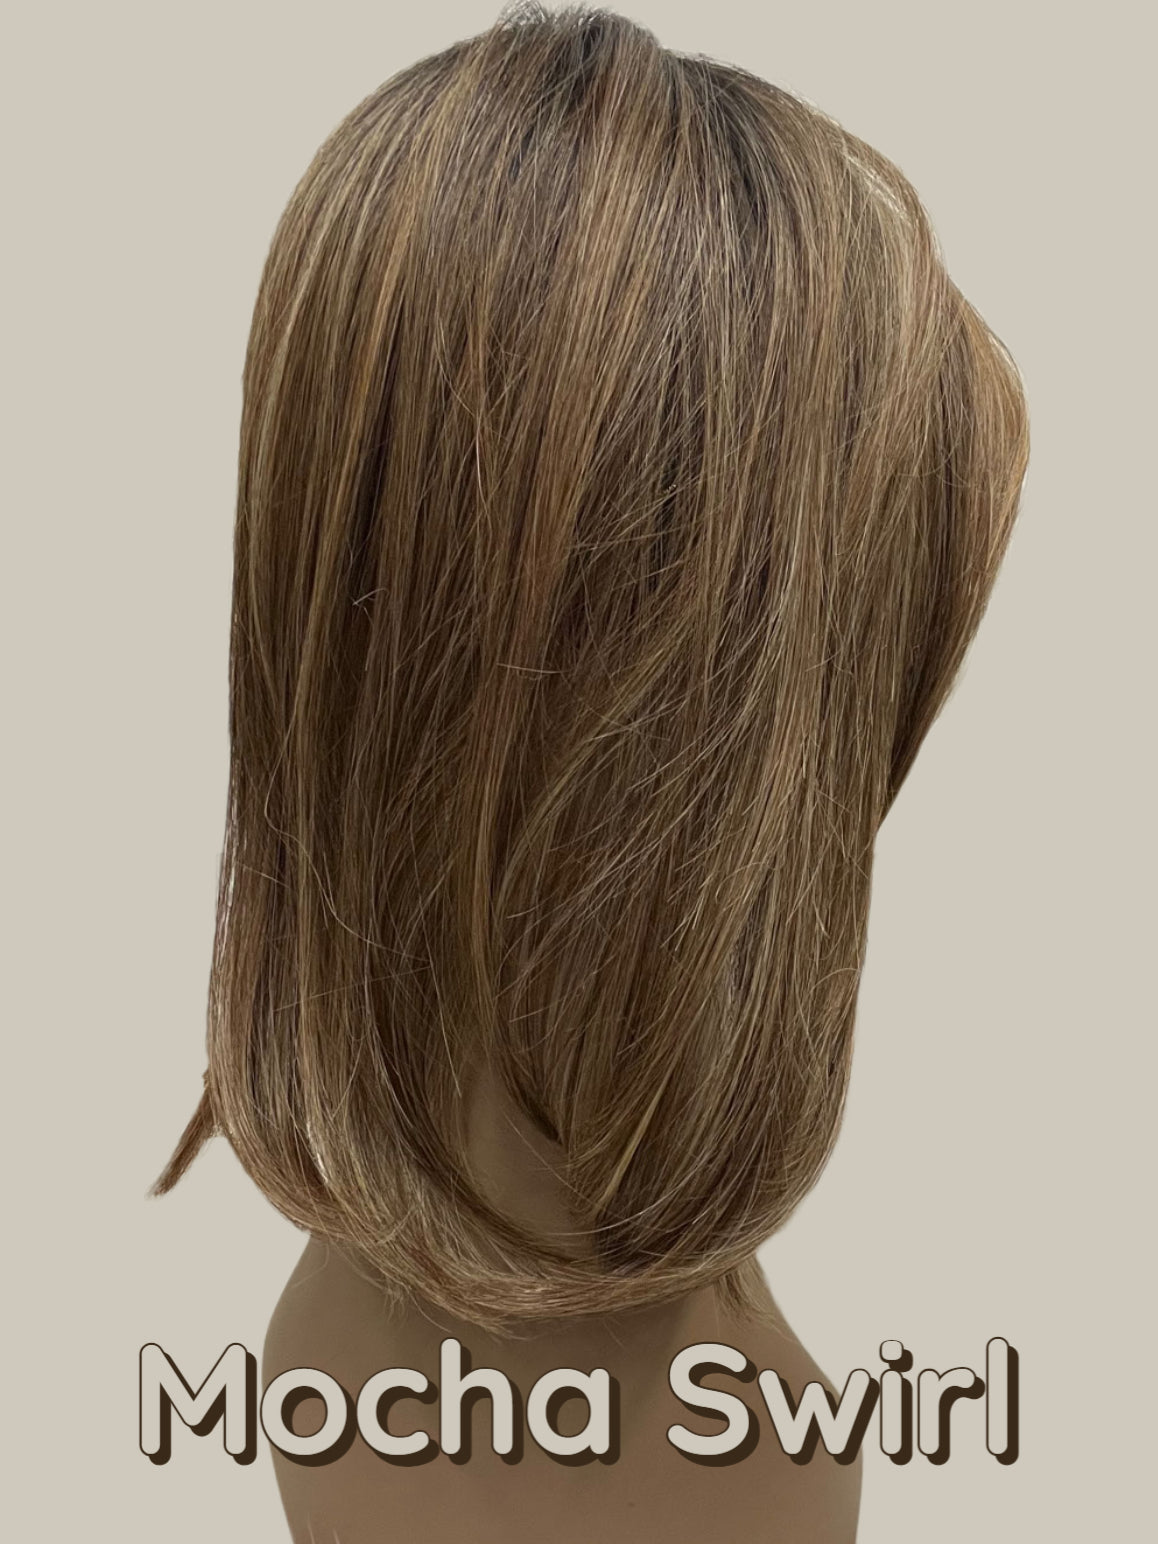 14 Inch Topper Straight LACE FRONT - 40% OFF THIS PRICE NO CODE NEEDED - FINAL SALE